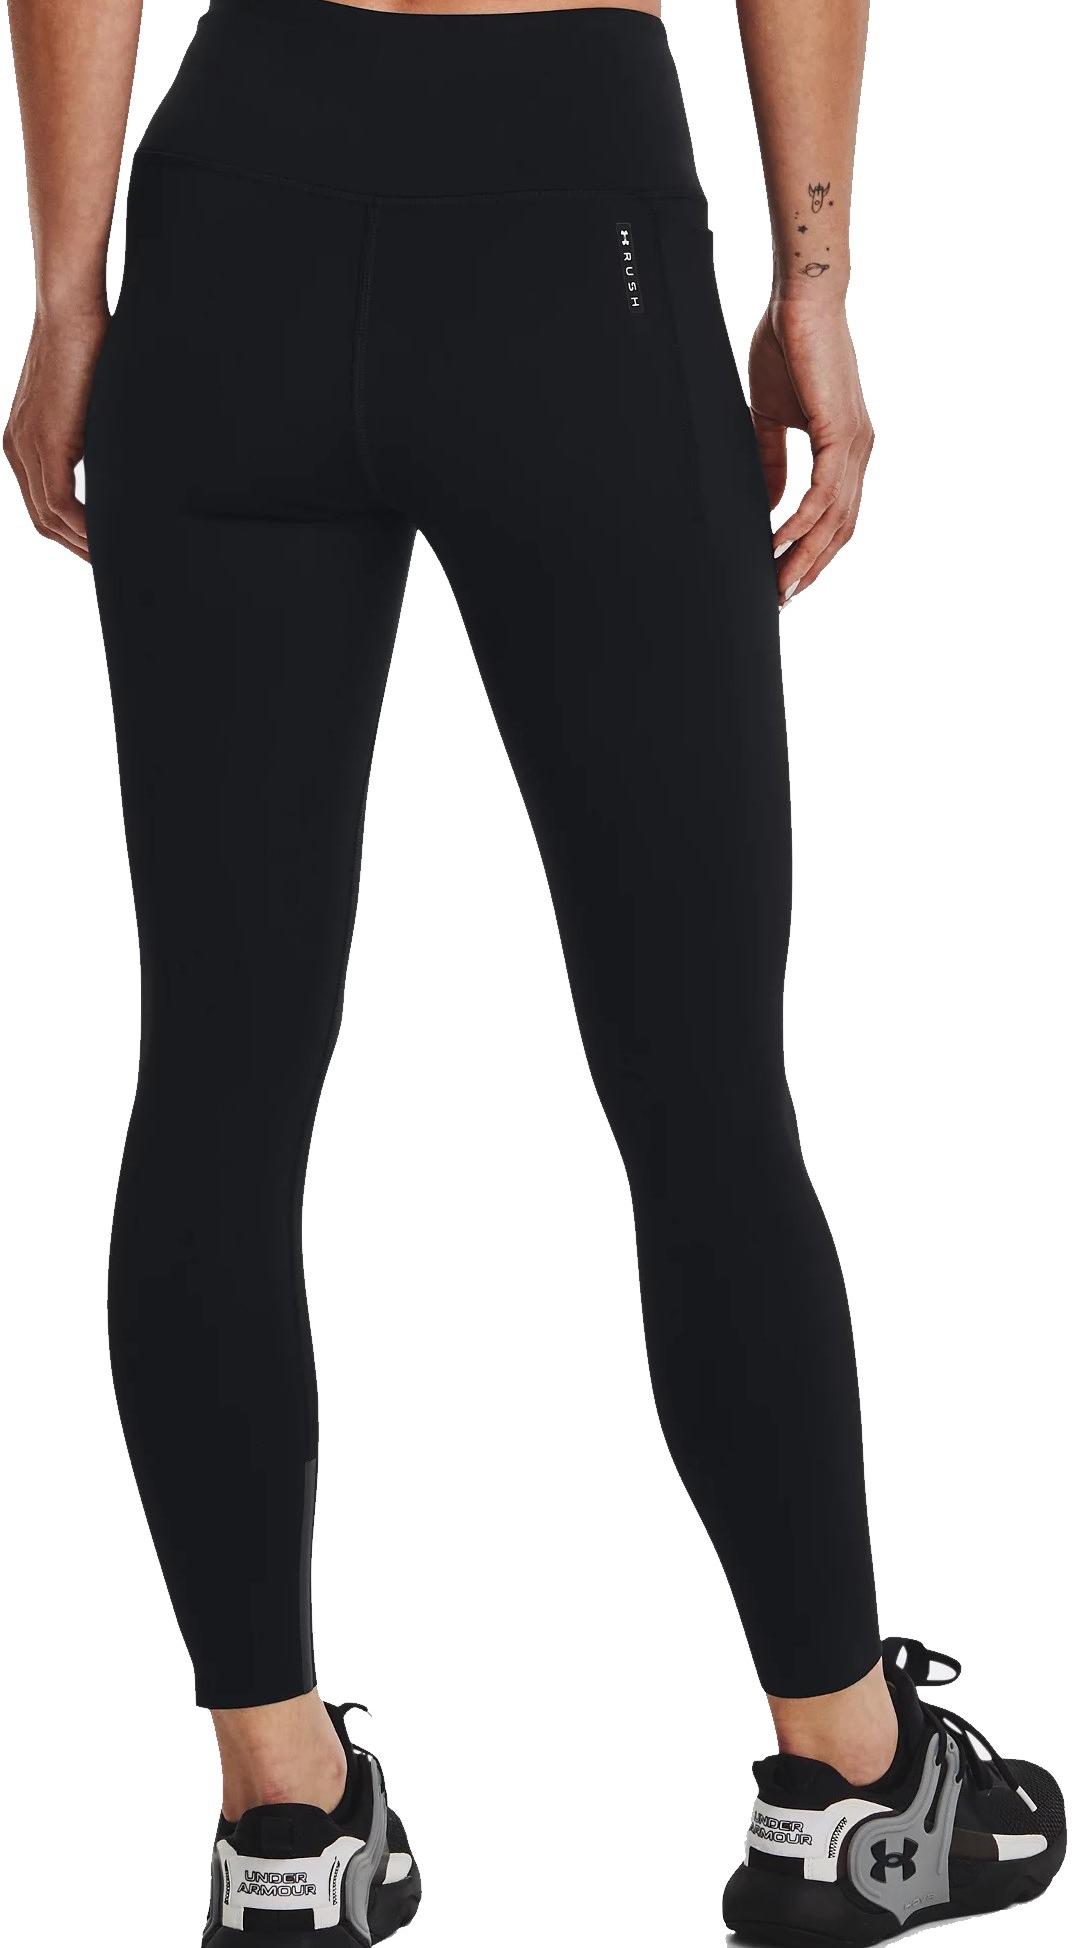 Under Armour Women's MFO Movement Ankle Leg Fitted Black Leggings (XL)